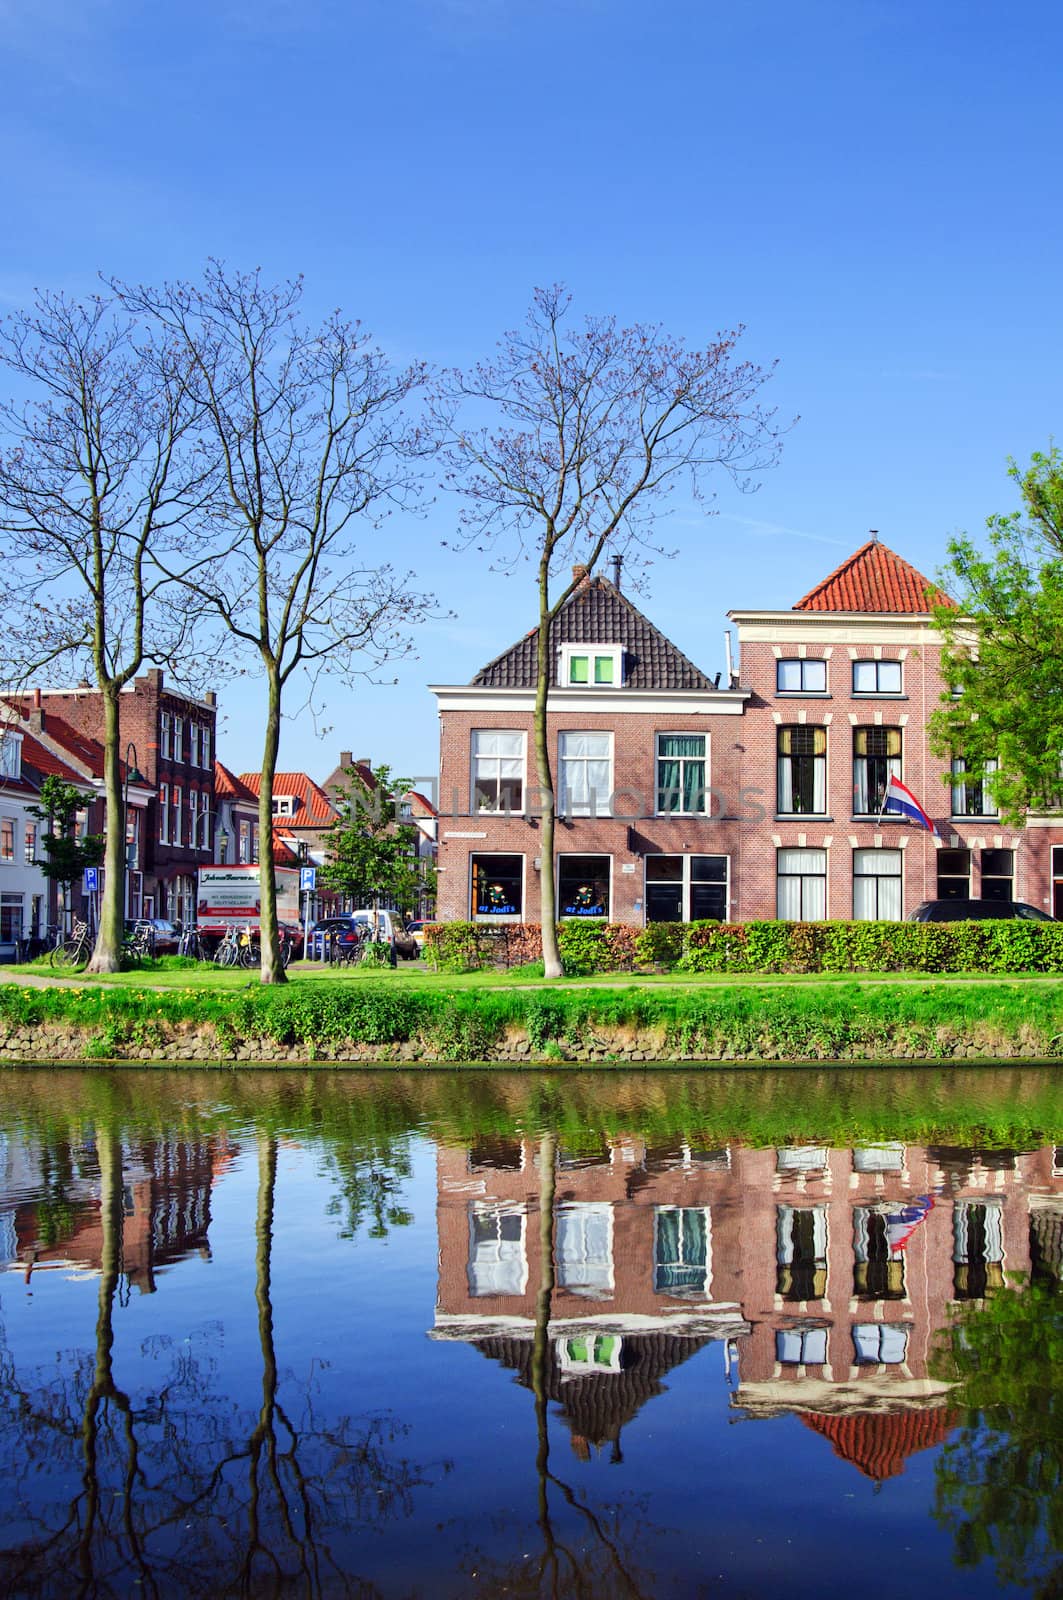 A typical Dutch street in the Delph.